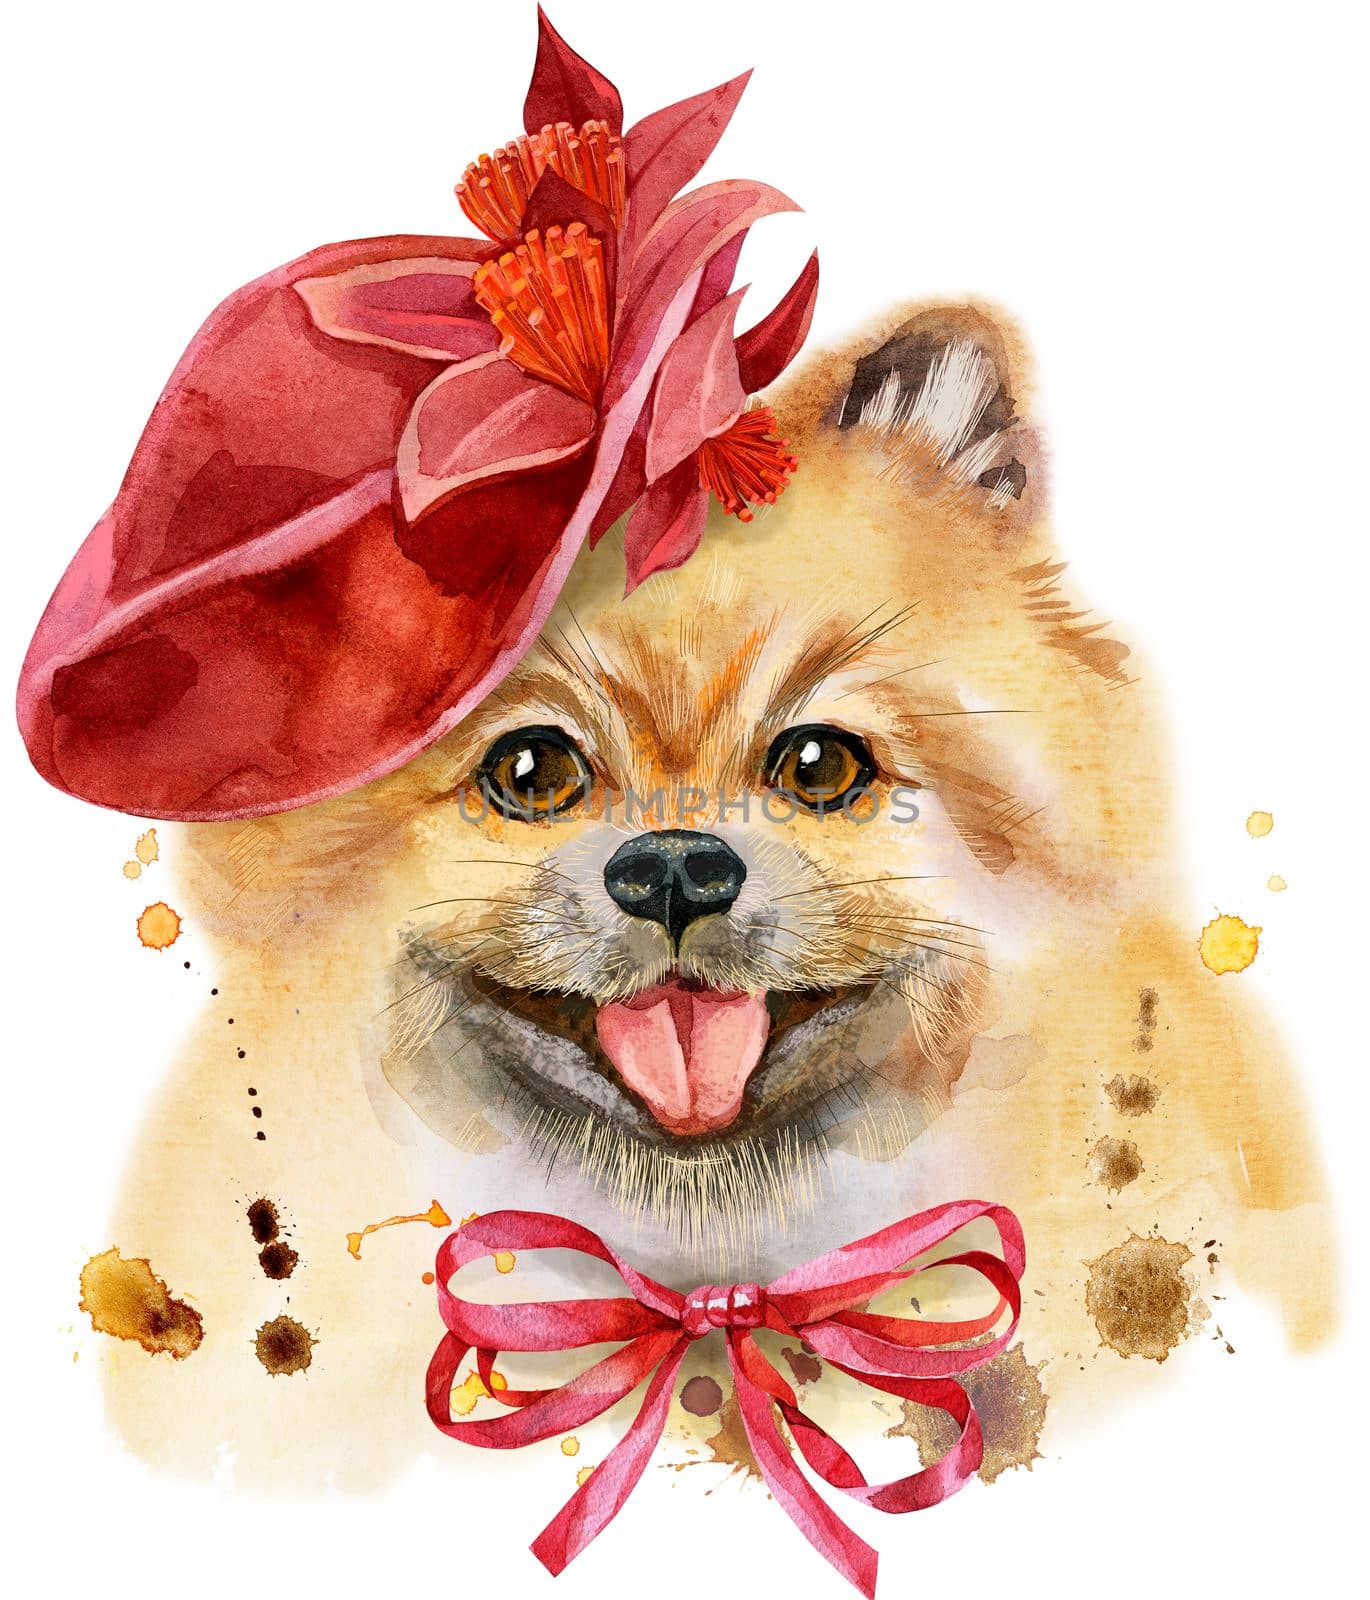 Cute Dog in red hat. Dog T-shirt graphics. watercolor pomeranian spitz illustration